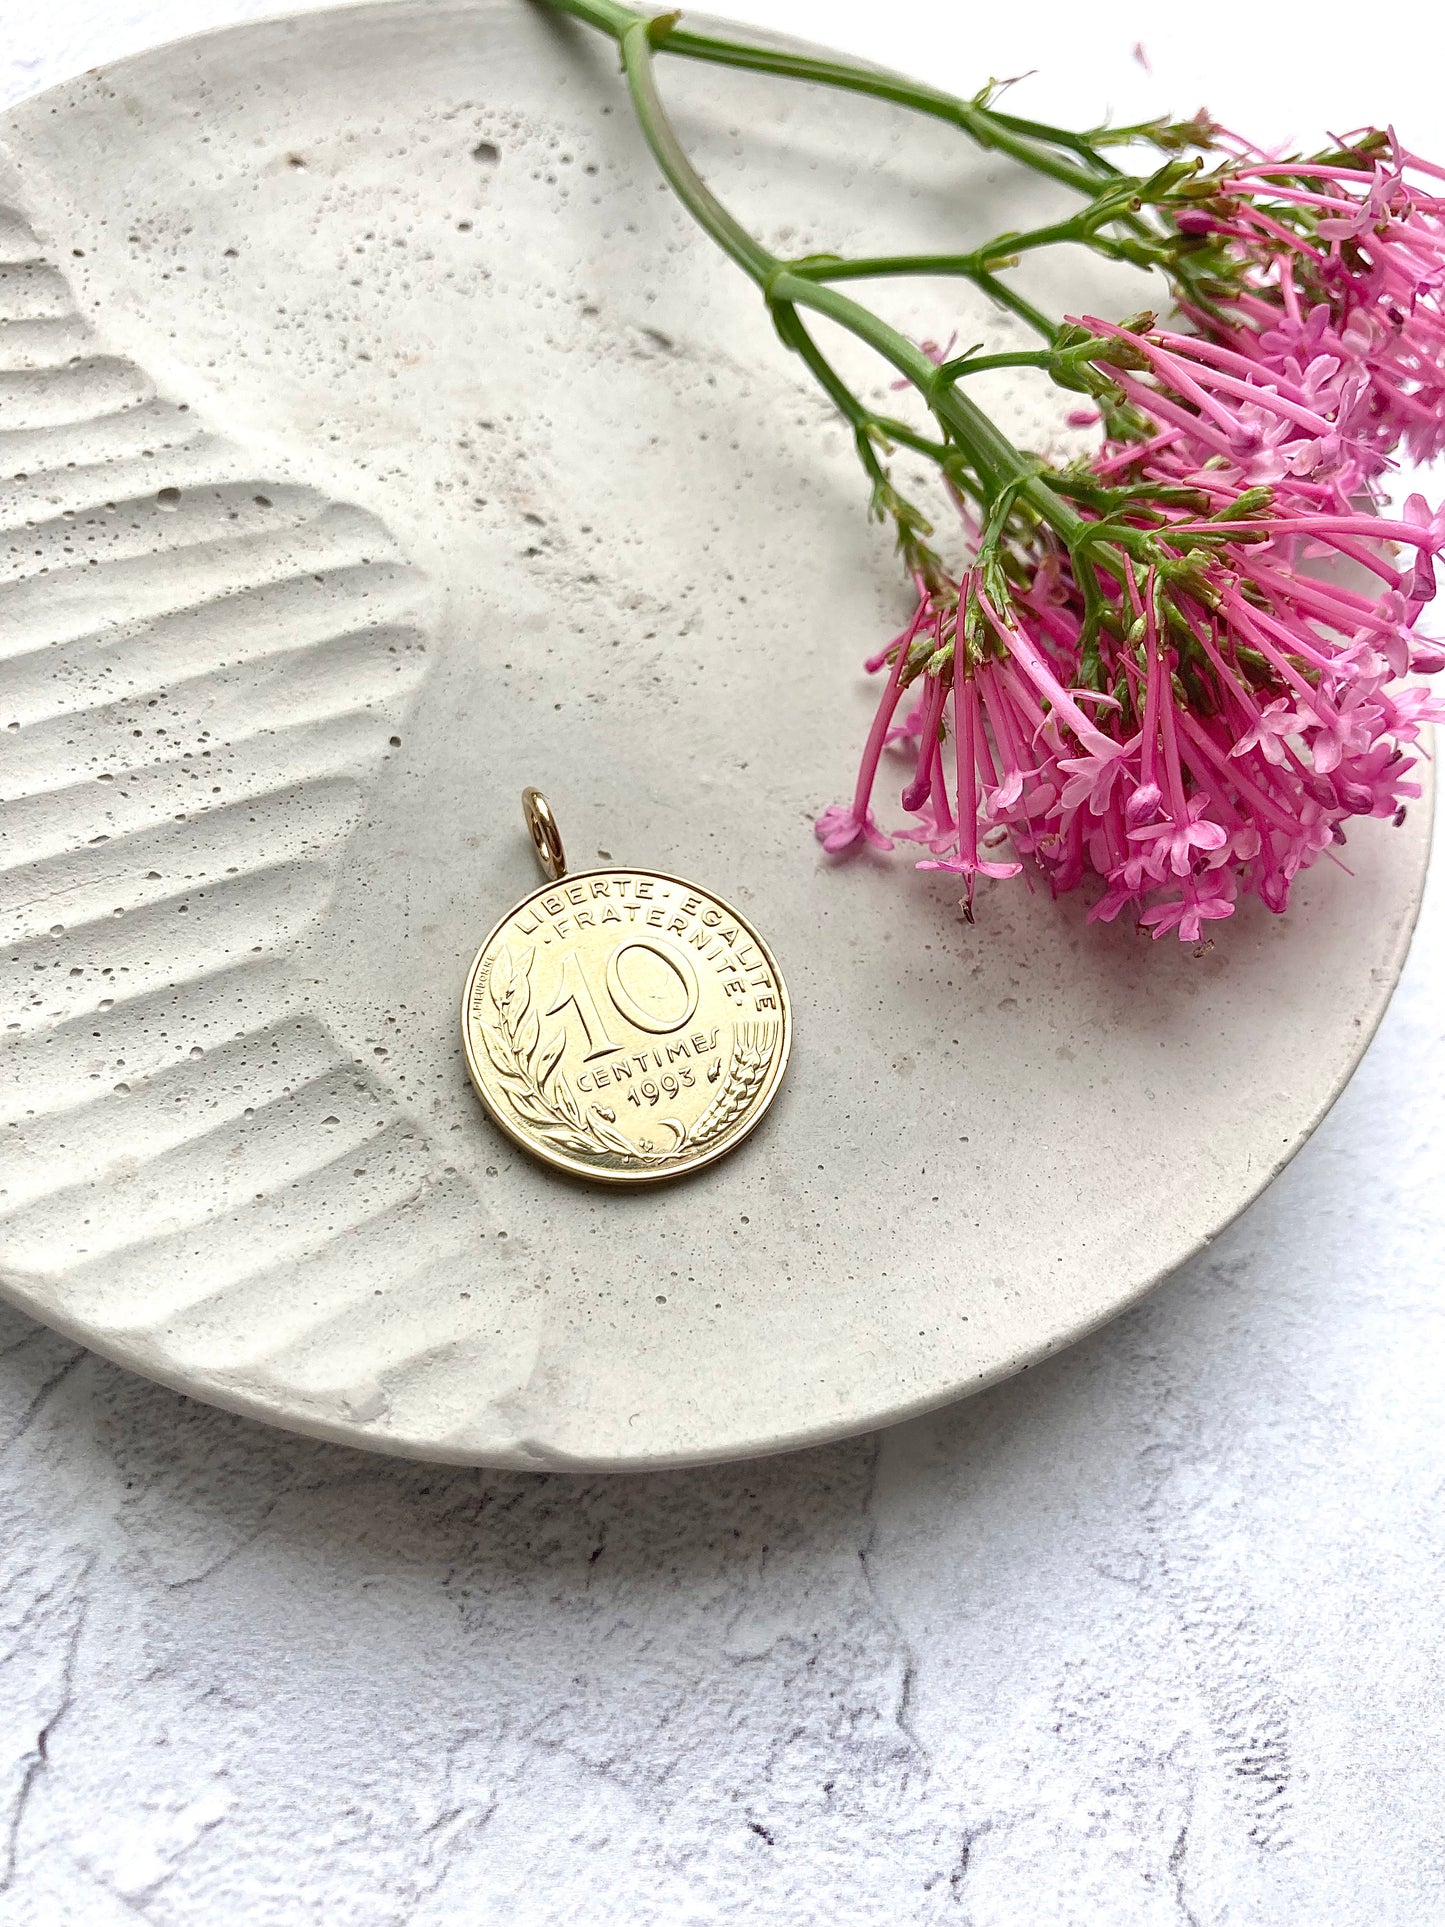 1993 French 10c Coin Necklace - Gold Bail